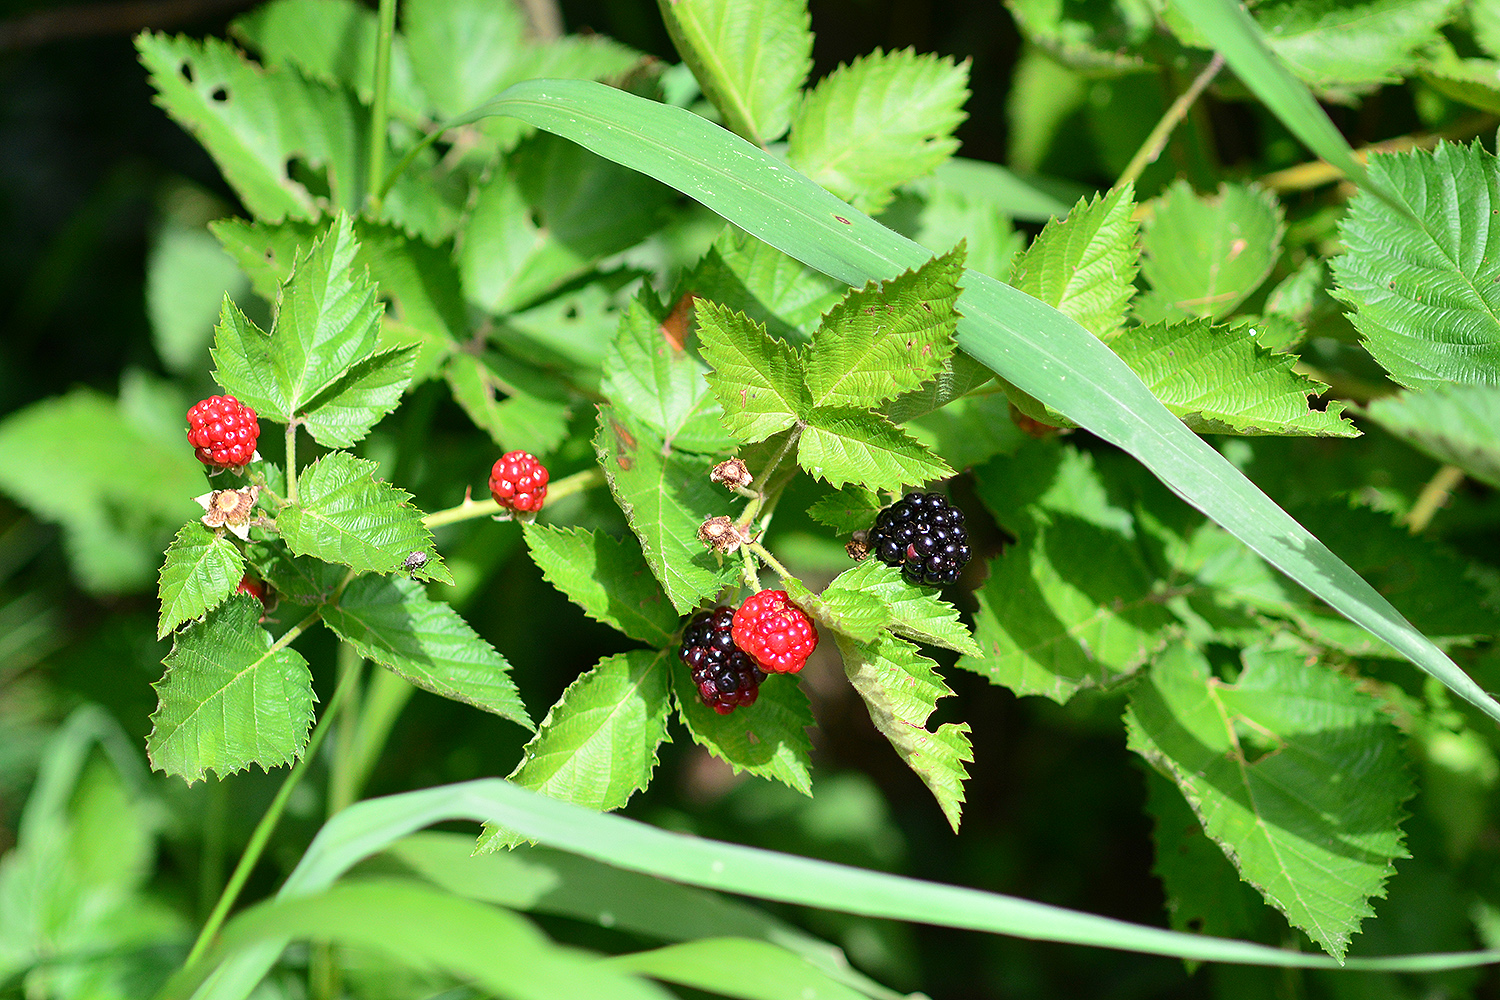 Blackberries, blueberries and multiple fruit trees offer edible treats throughout the summer for humans and wildlife. 